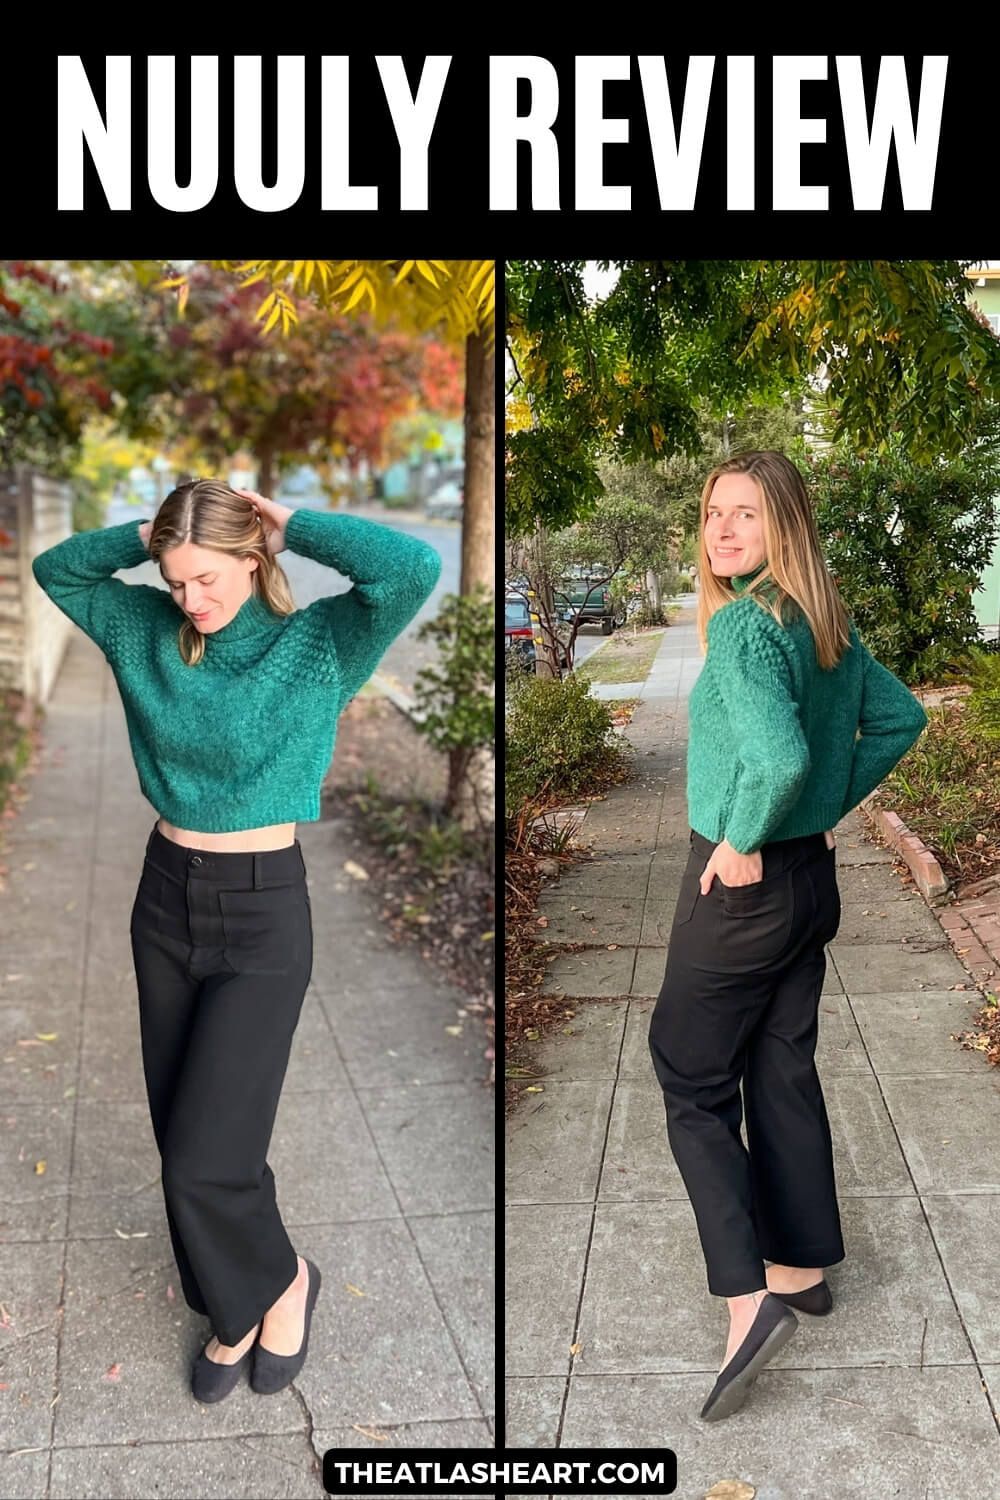 A young, light-haired woman shown in two different poses wears a green sweater and black pants on a residential sidewalk, with yellow autumn leaves surrounding her, and the text overlay, "Nuuly Review."